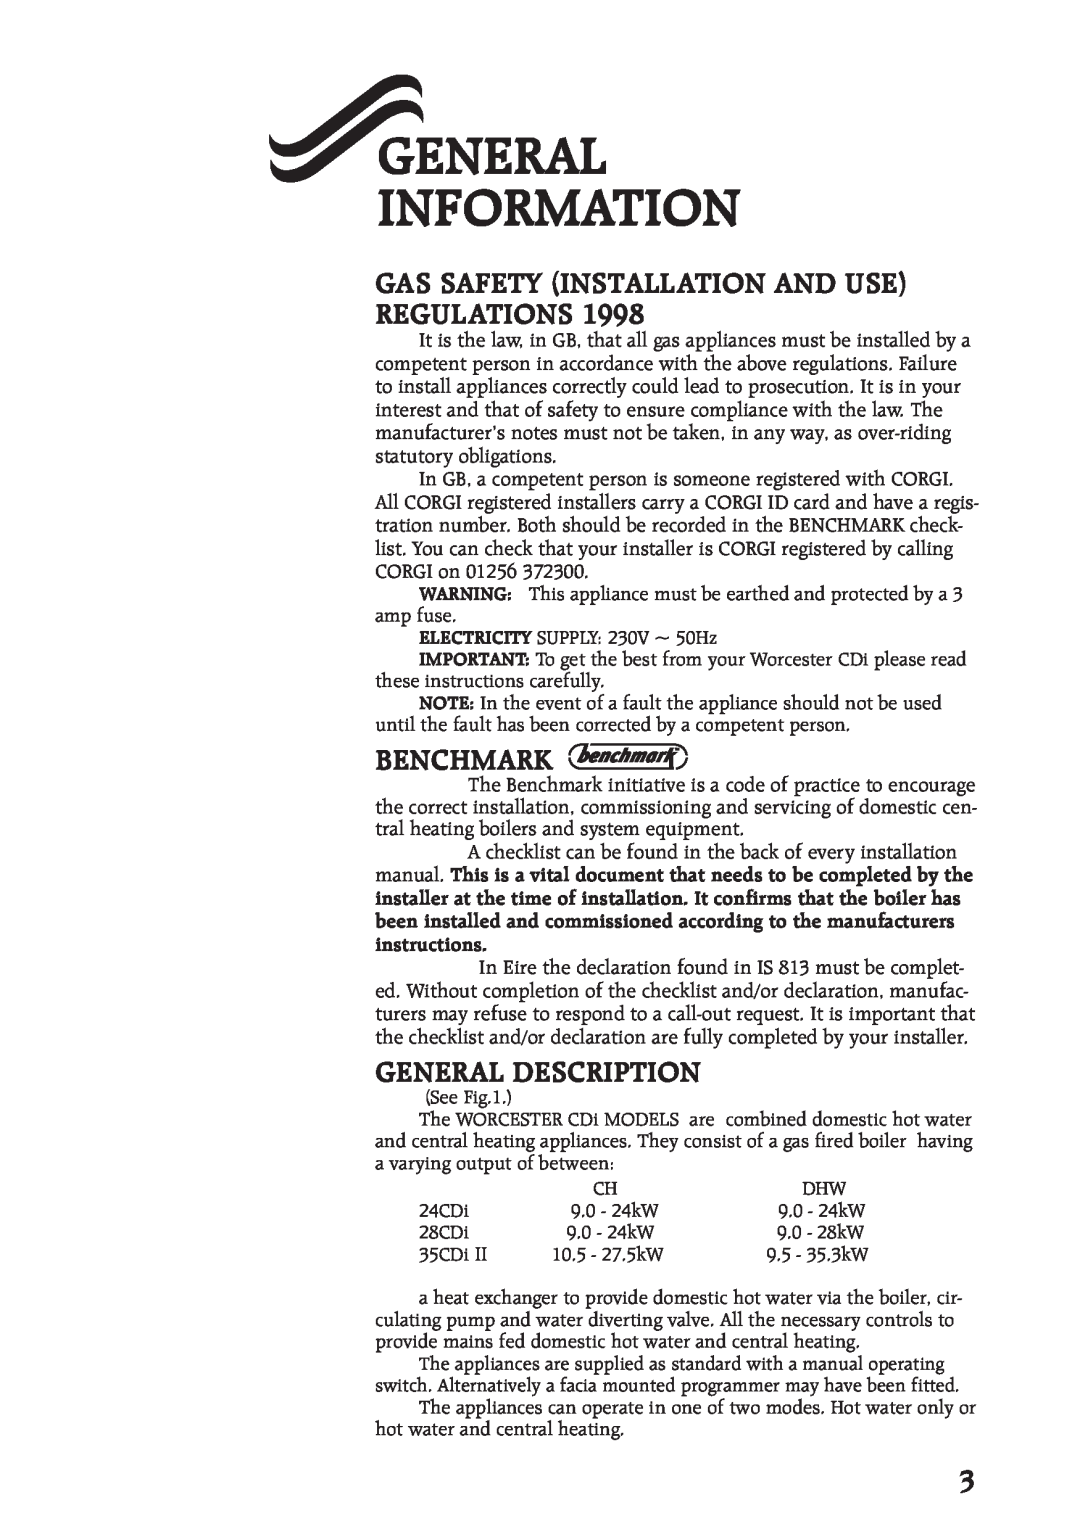 Bosch Appliances 35CDI II General Information, Gas Safety Installation And Use Regulations, Benchmark, General Description 